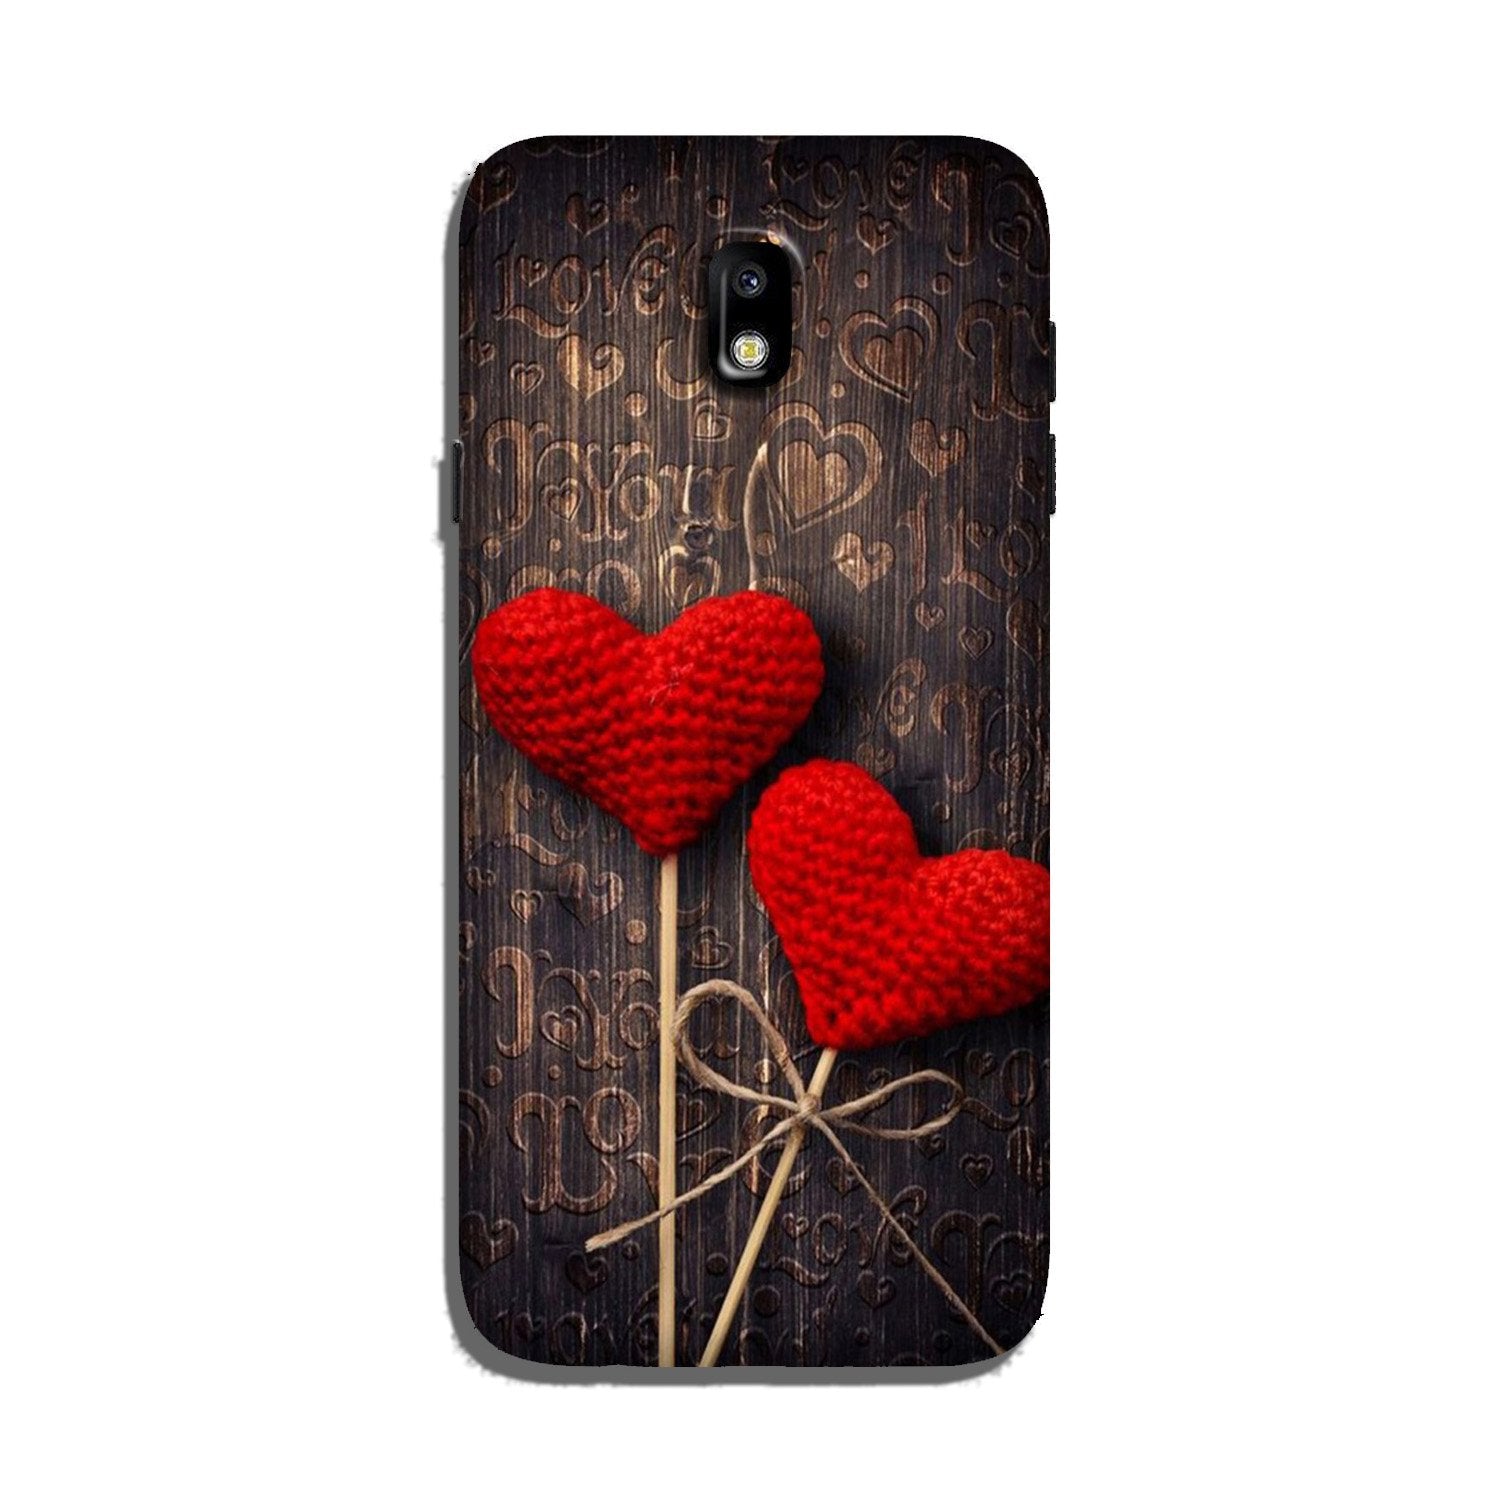 Red Hearts Case for Galaxy J5 Pro